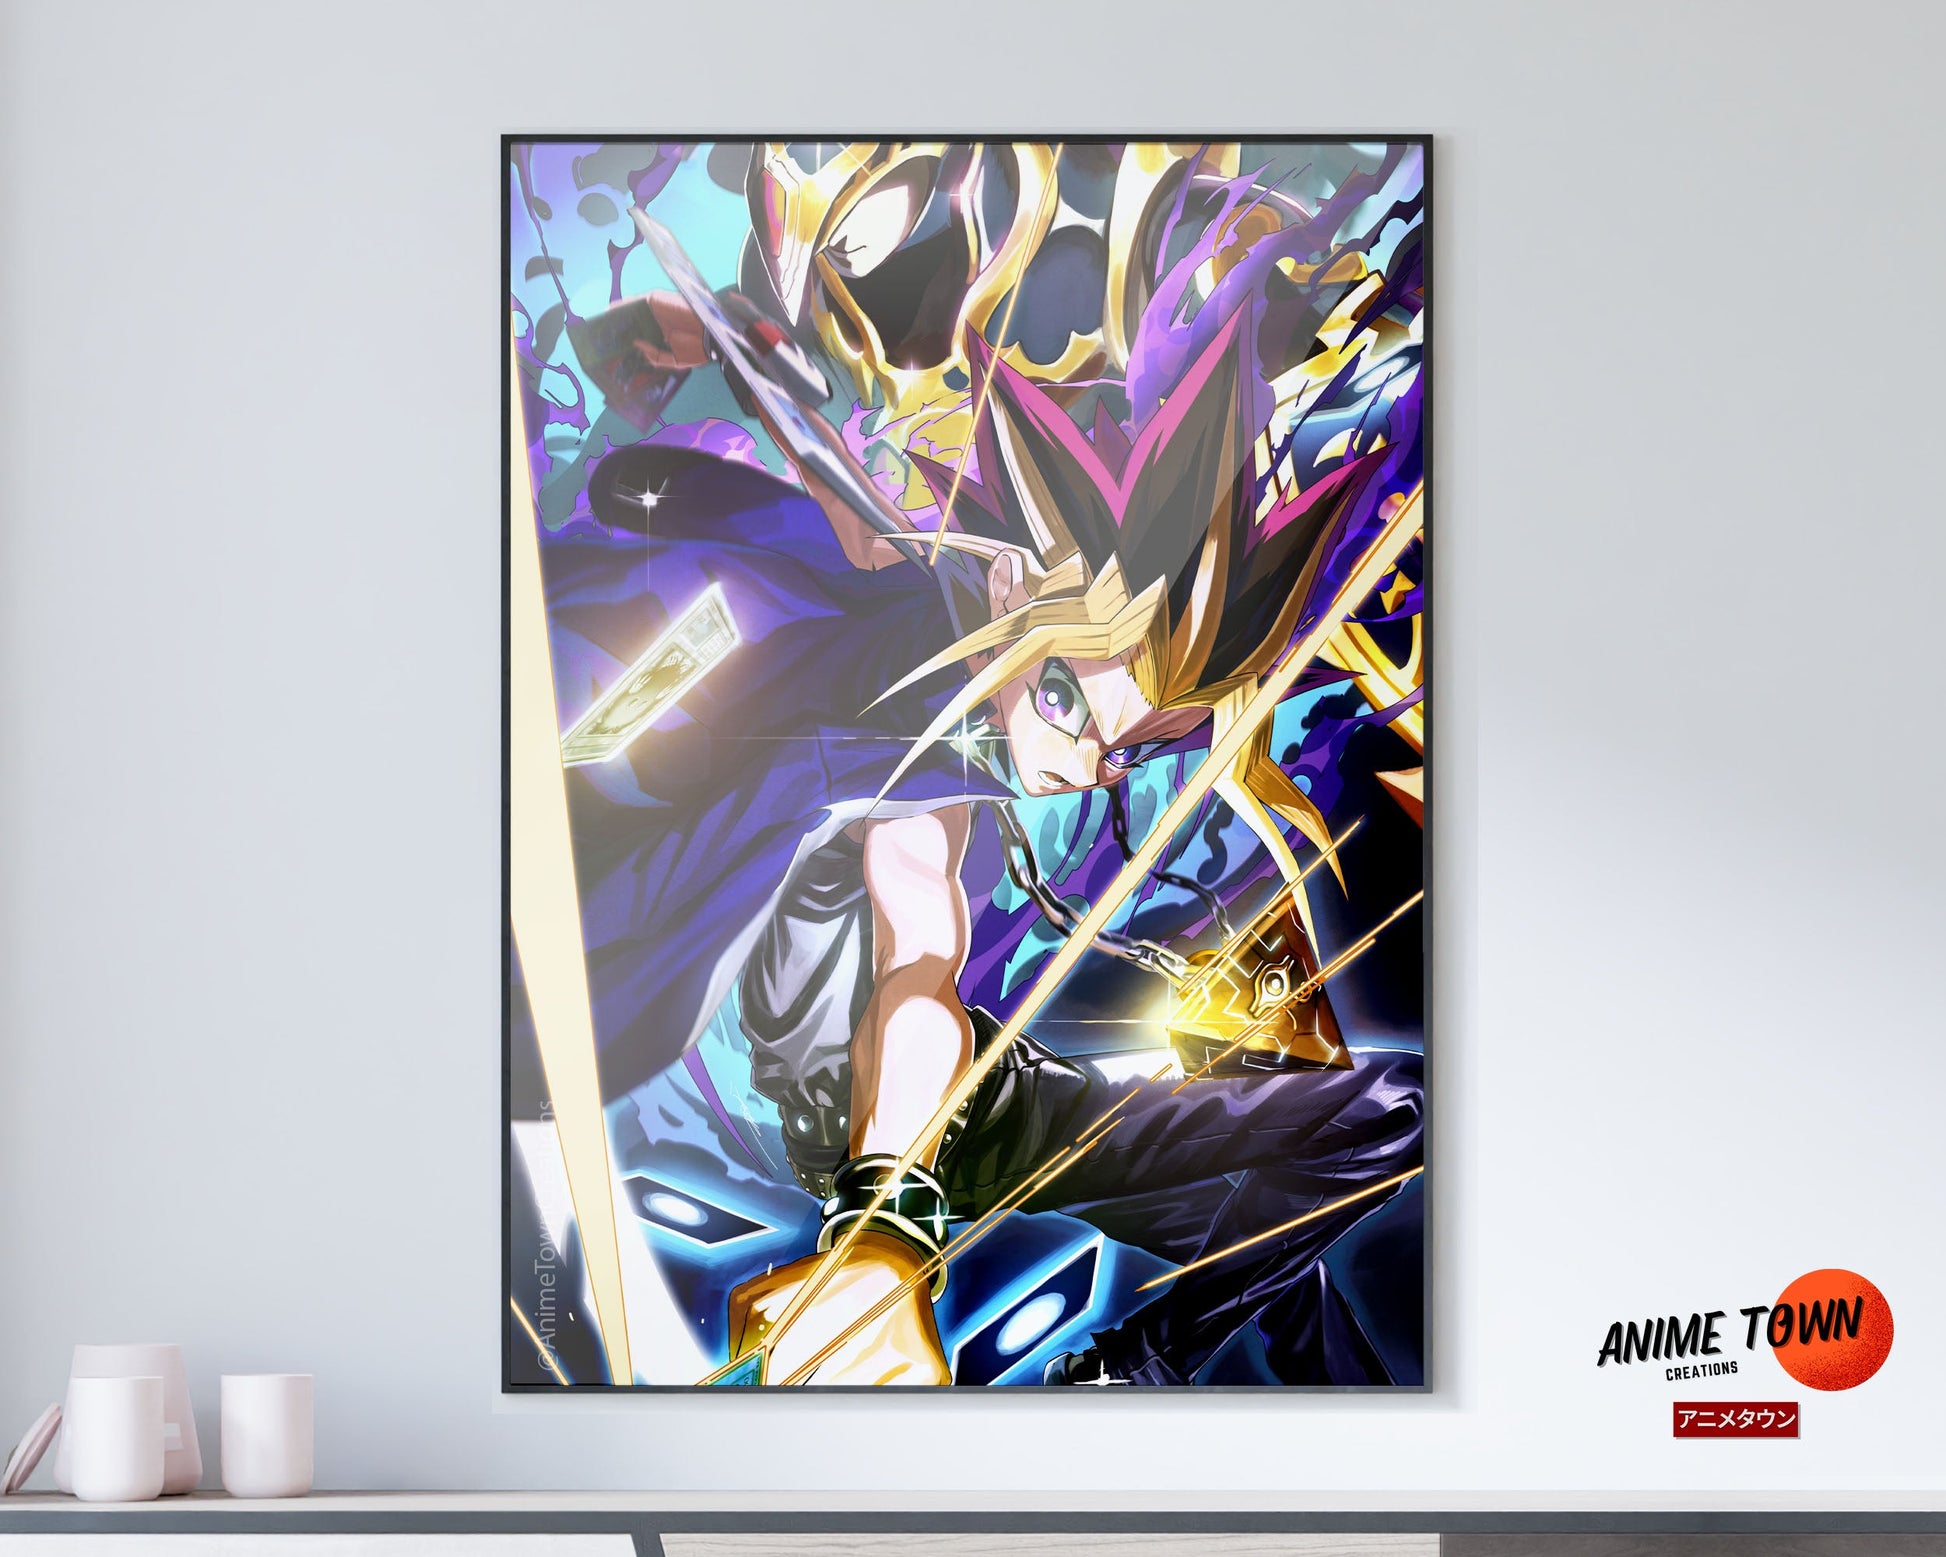 Anime Town Creations Poster Yugioh Yugi & Black Luster Soldier 5" x 7" Home Goods - Anime Yu-Gi-Oh Poster